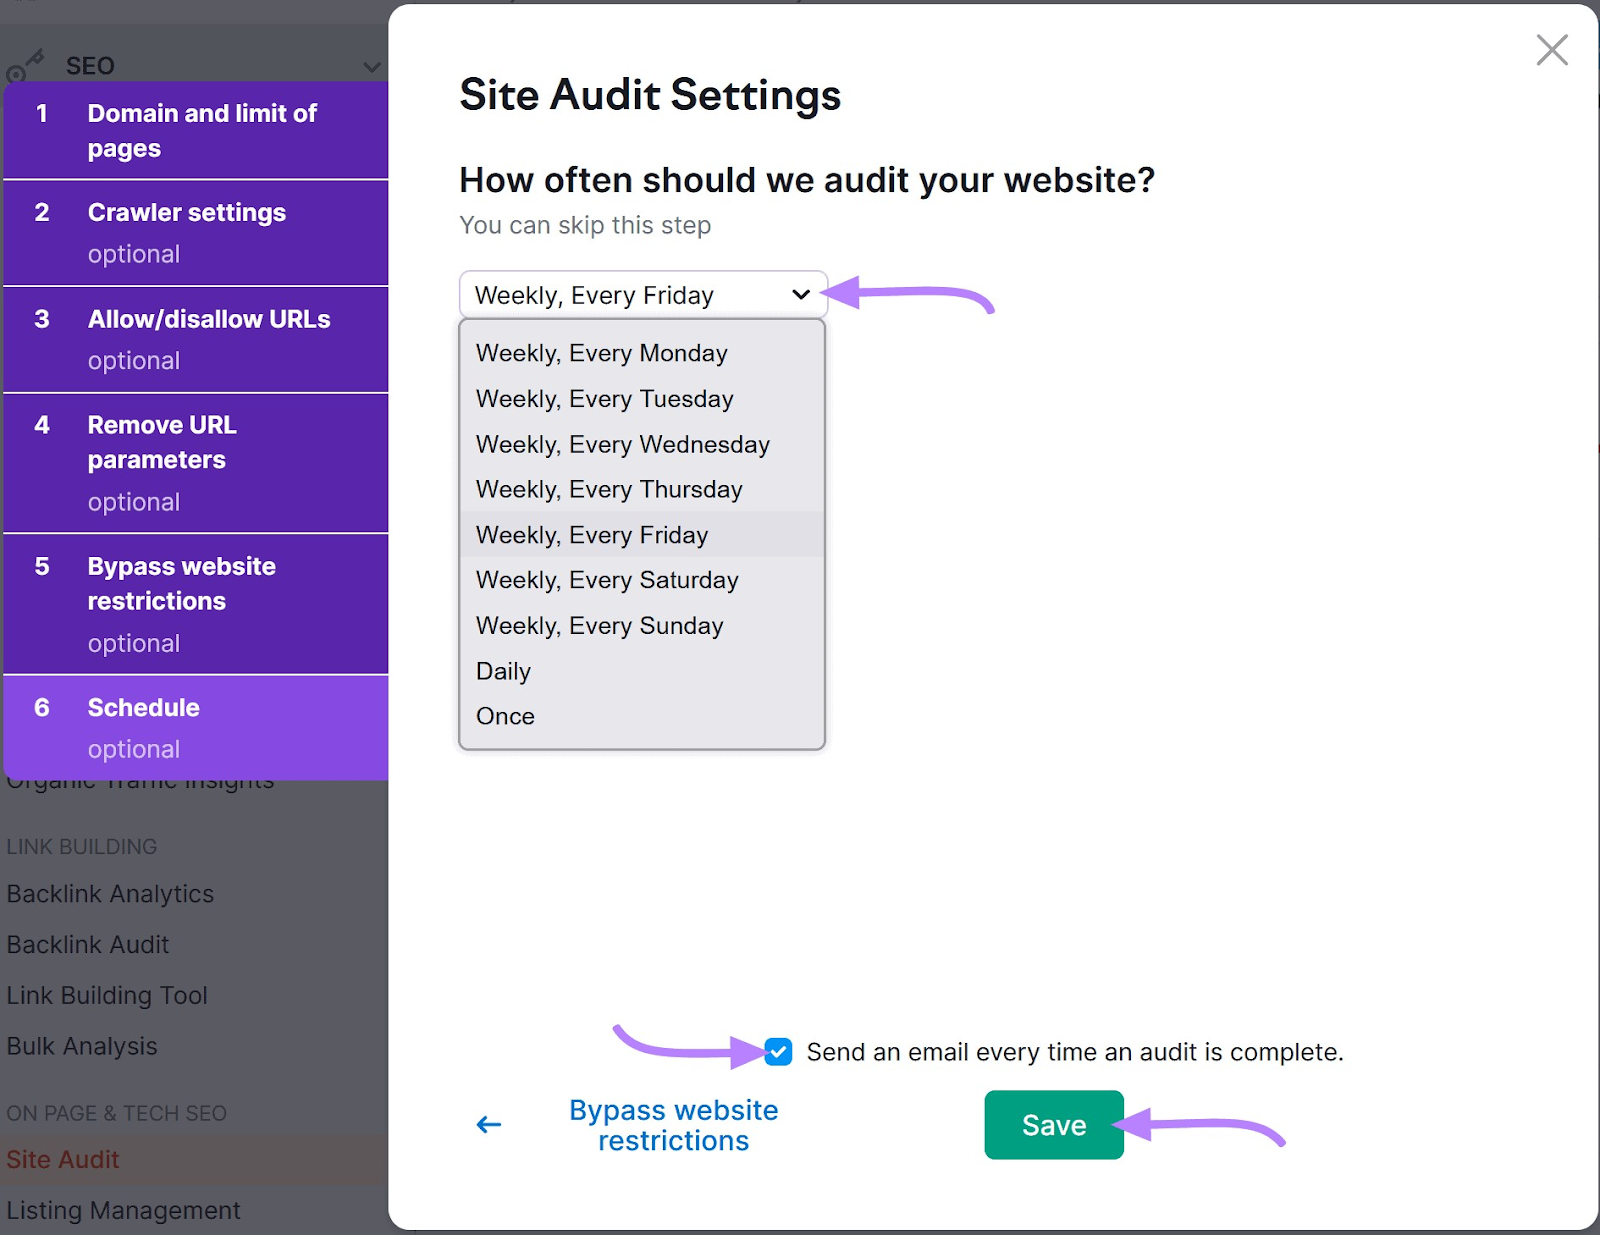 Schedule site audits in "Site Audit Settings" window